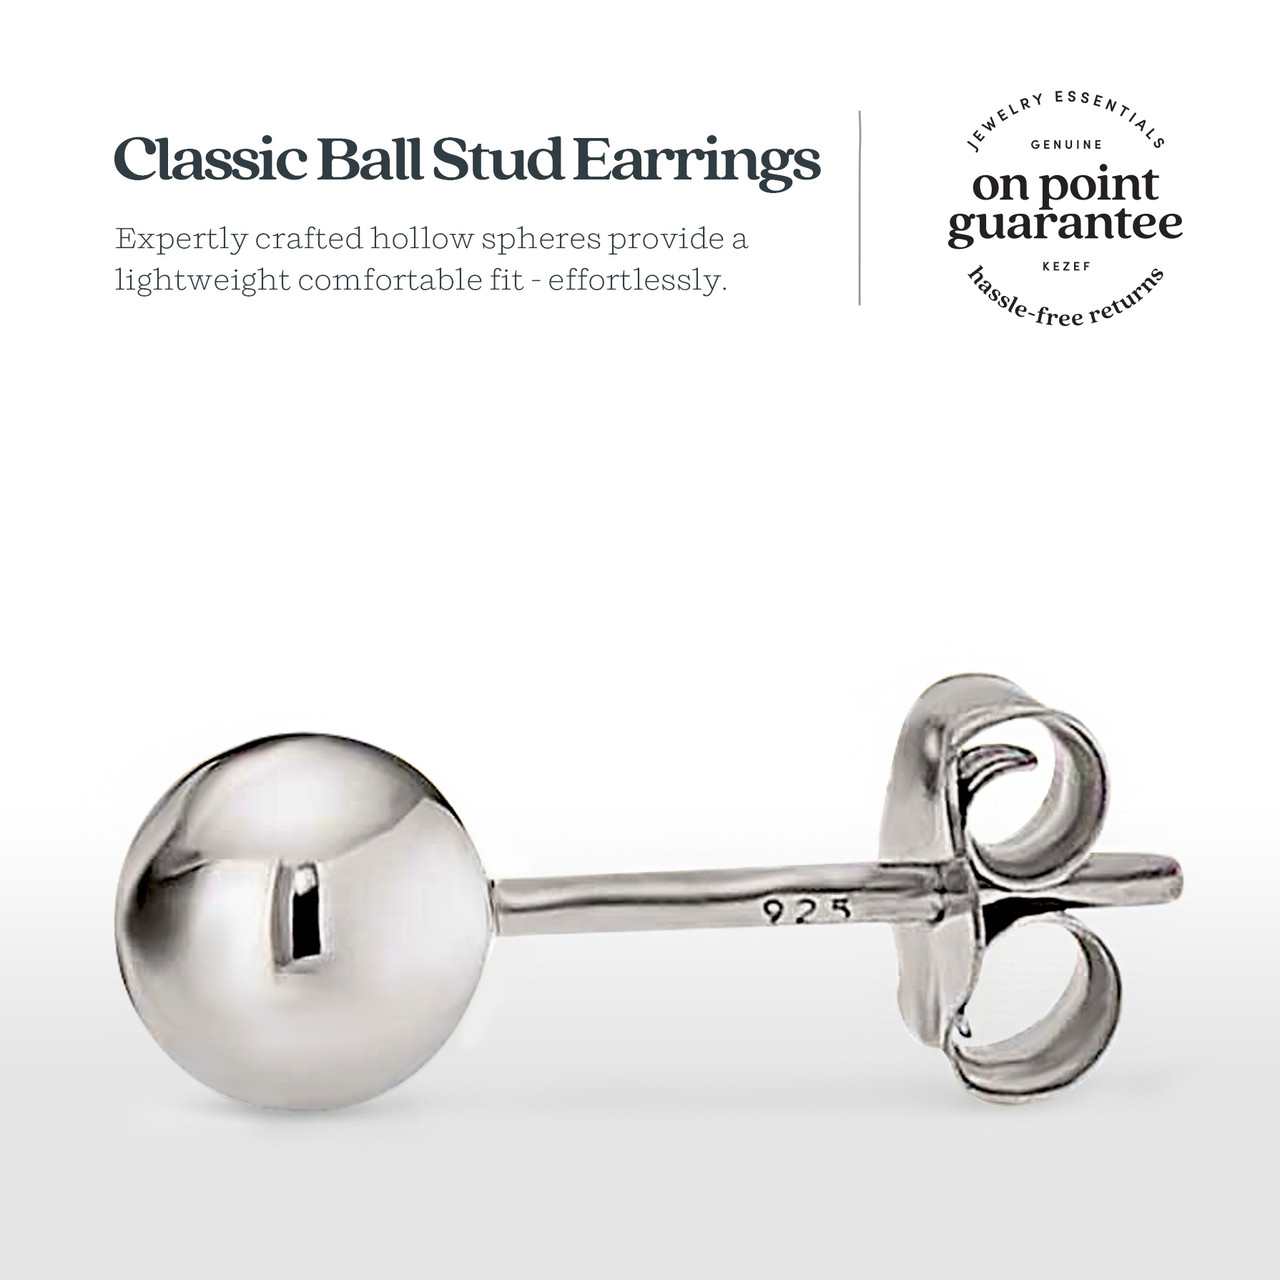 925 Sterling Silver Andralok Polished Round Circle Ball Bead Stud Earrings 